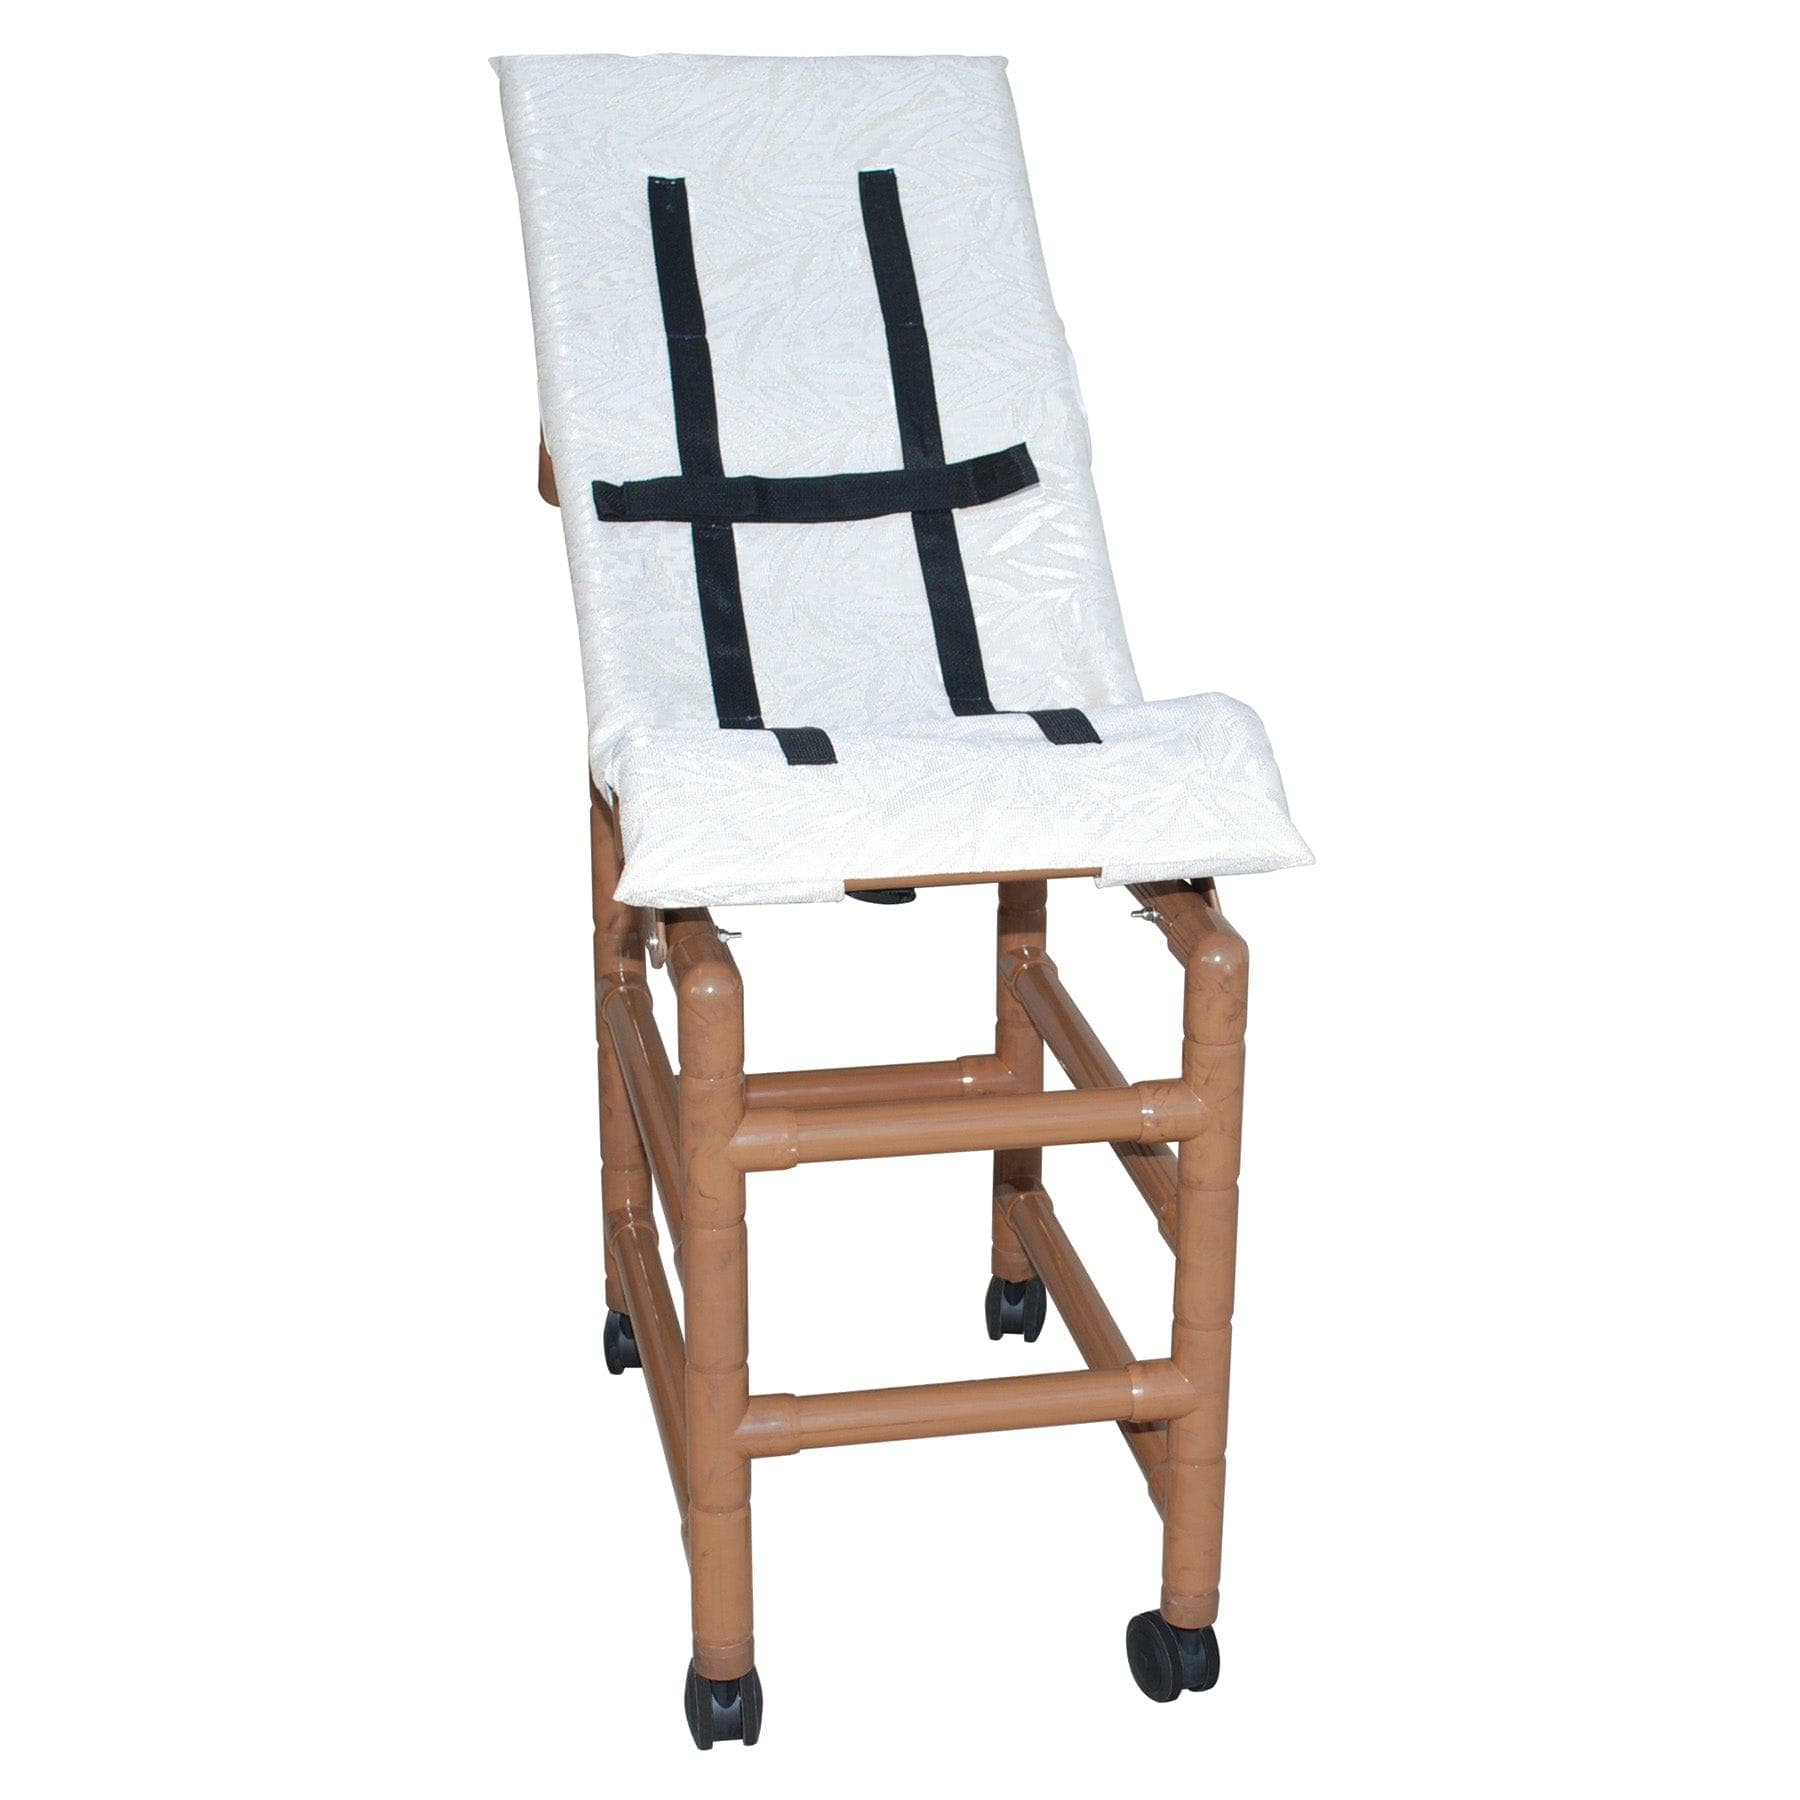 MJM International WoodTone Series Shower Chairs MJM International WoodTone Large Reclining Shower Chair With Base Extension And Casters